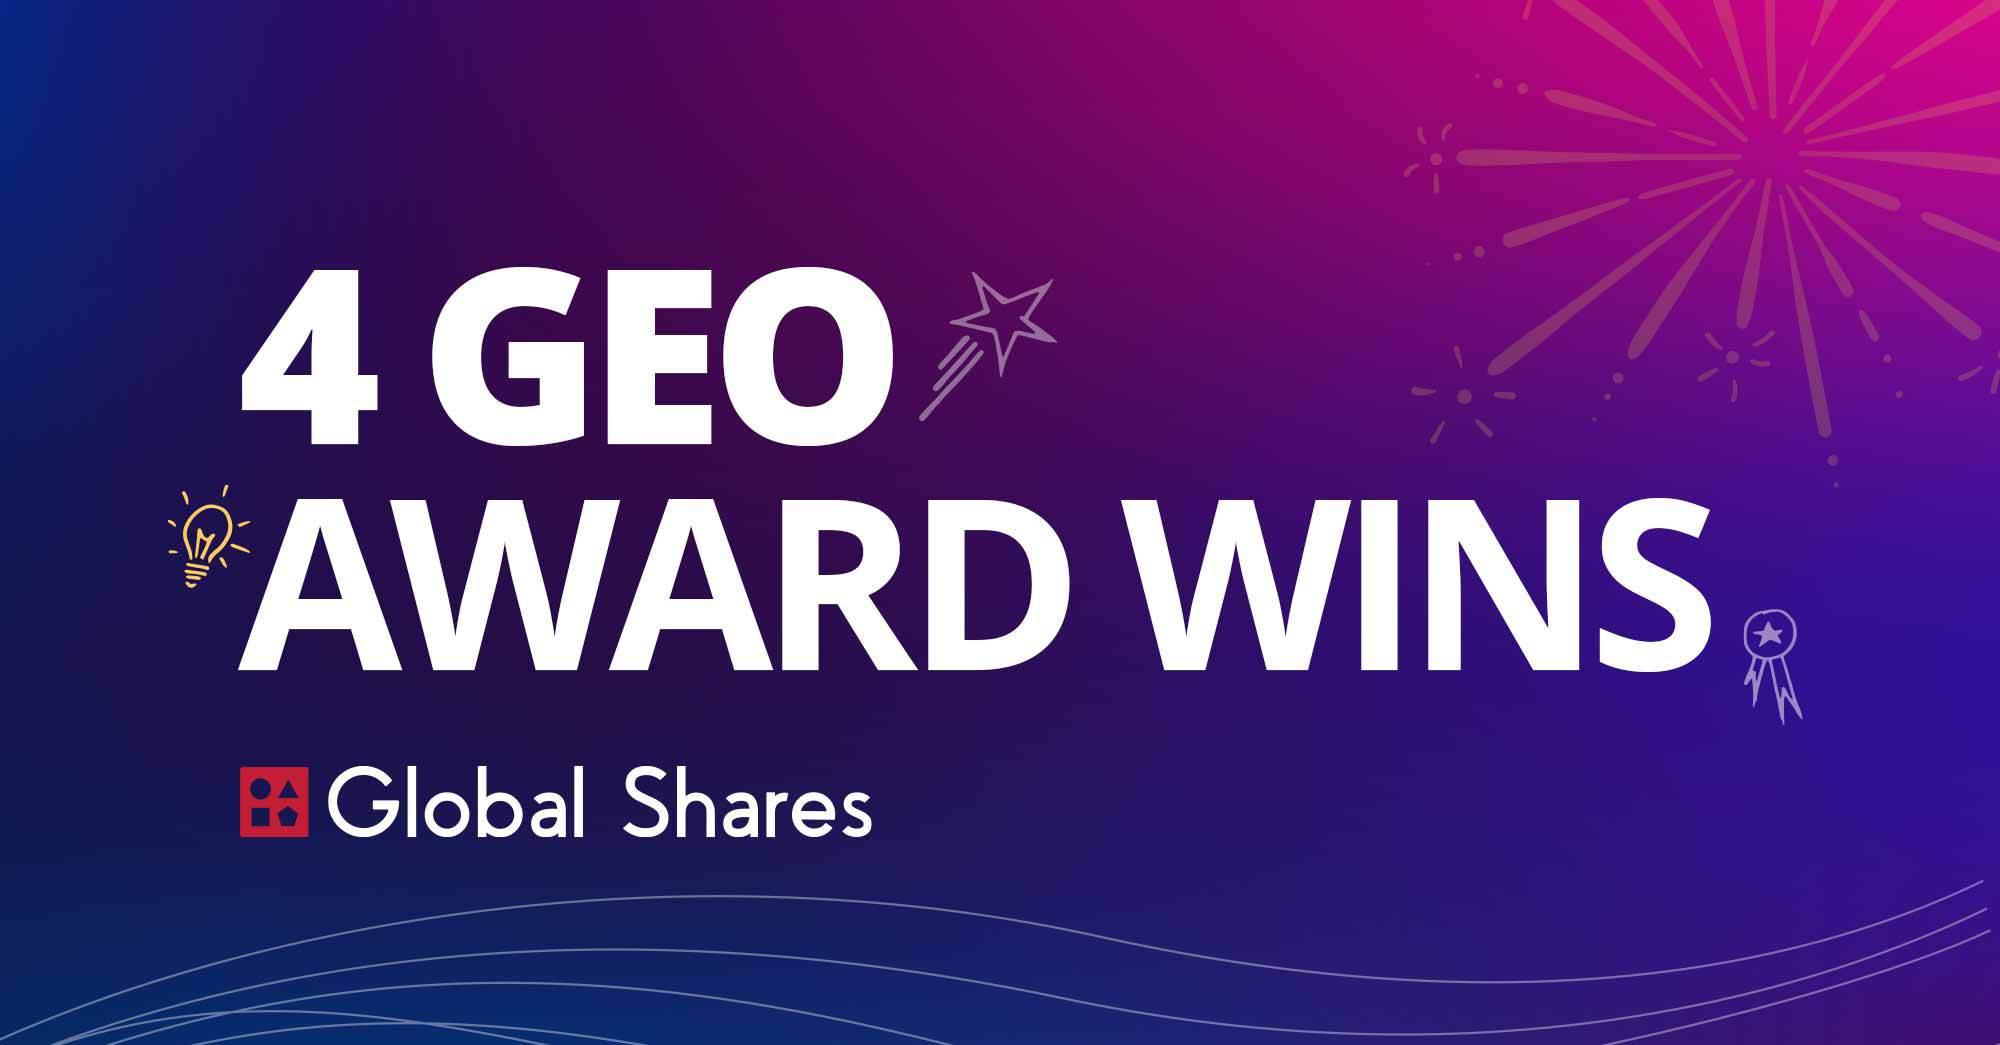 4 Client Wins at GEO Industry Awards